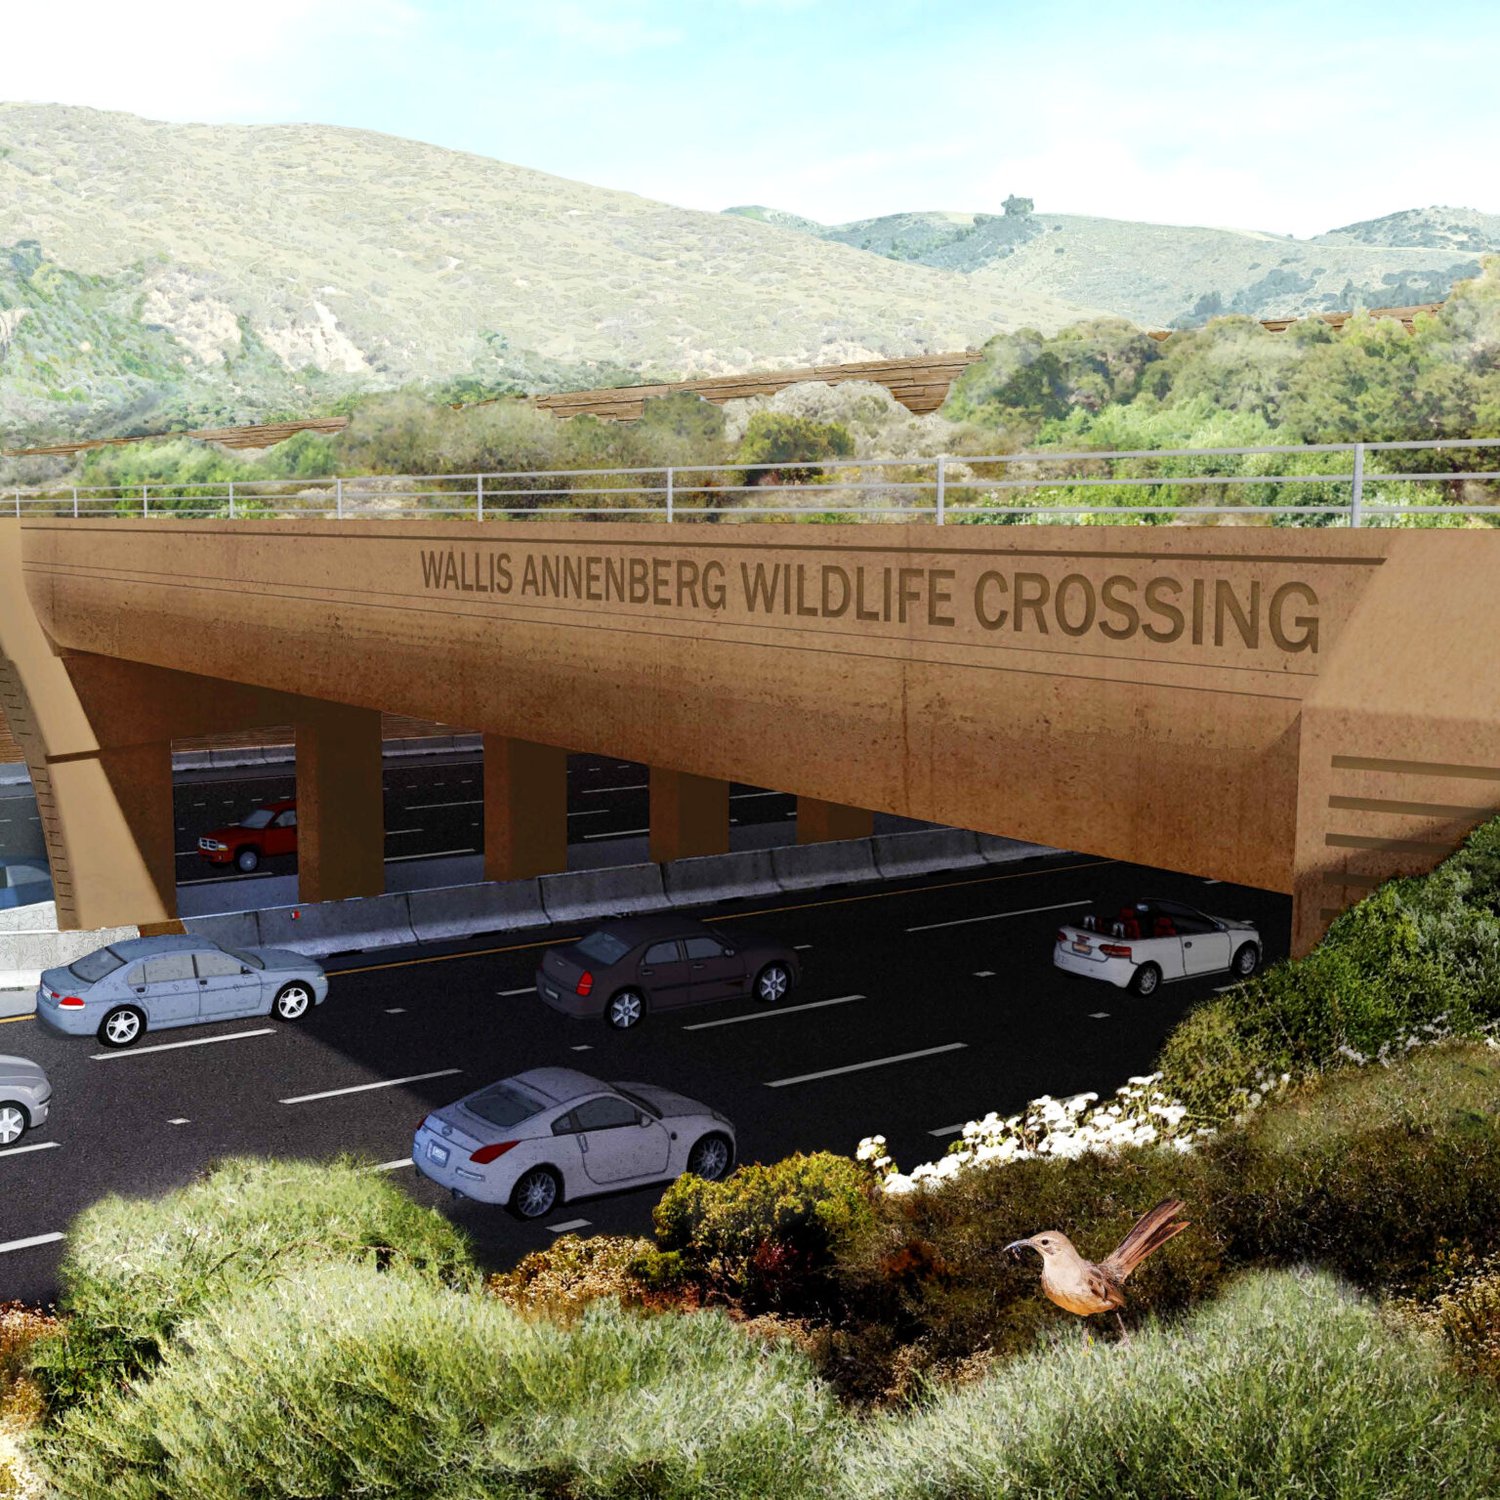 Closeup of the overpass of the Wallis Annenberg Wildlife Crossing over a highway.